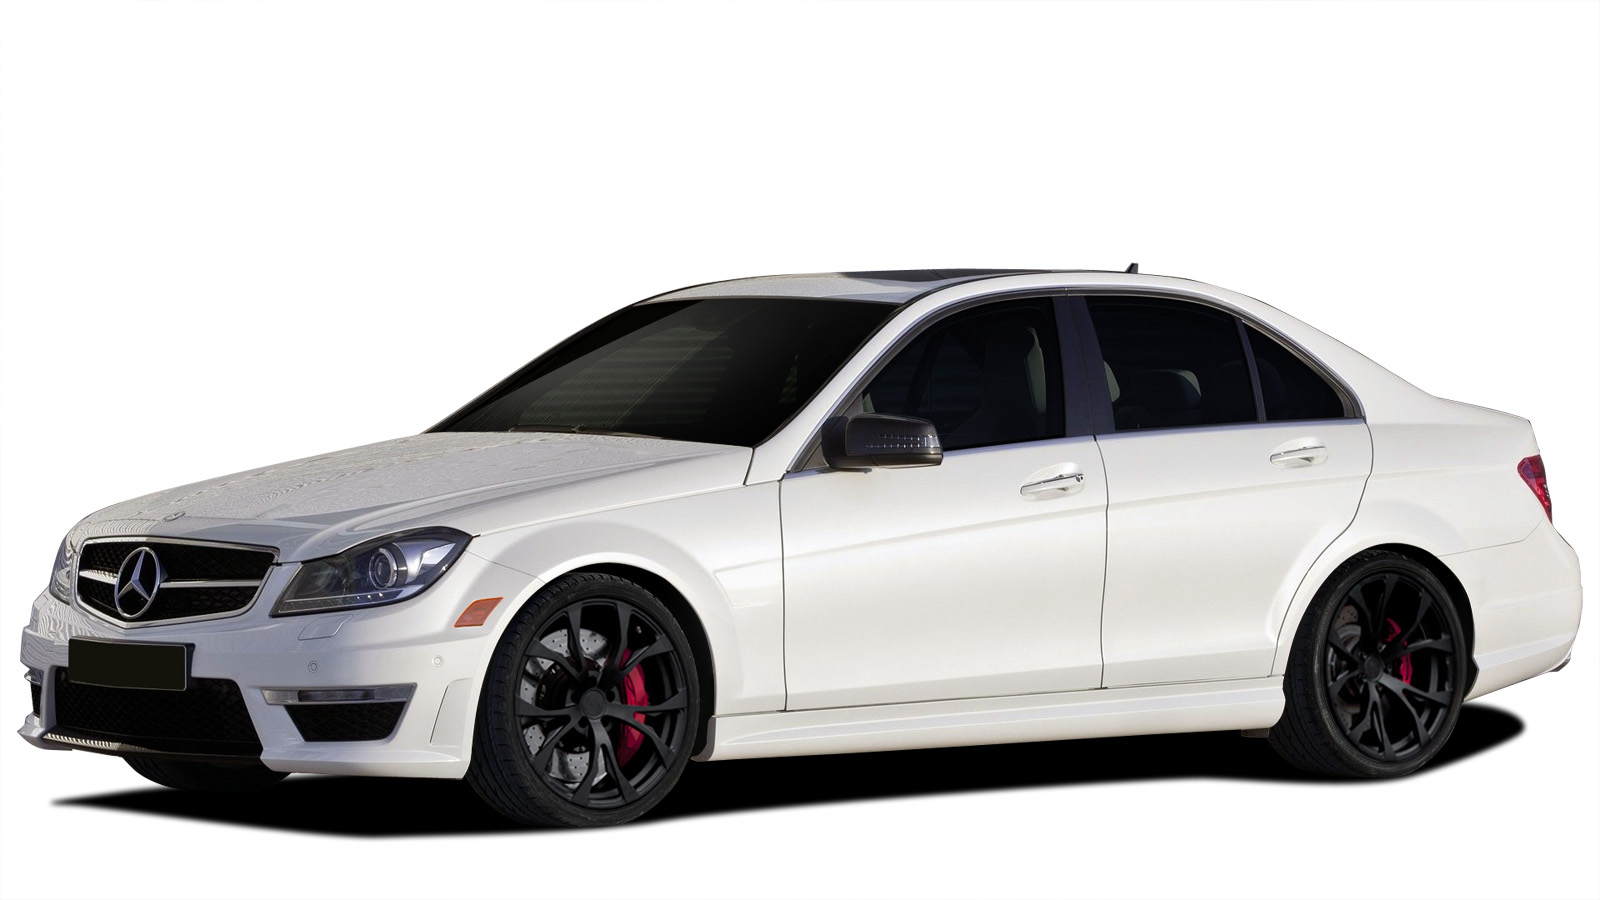 Body Kit Bodykit for 2012 Mercedes C Class ALL - Mercedes C Class C350 W204 Vaero C63 Look Conversion Kit ( with PDC ) - 9 Piece - Includes C63 Look